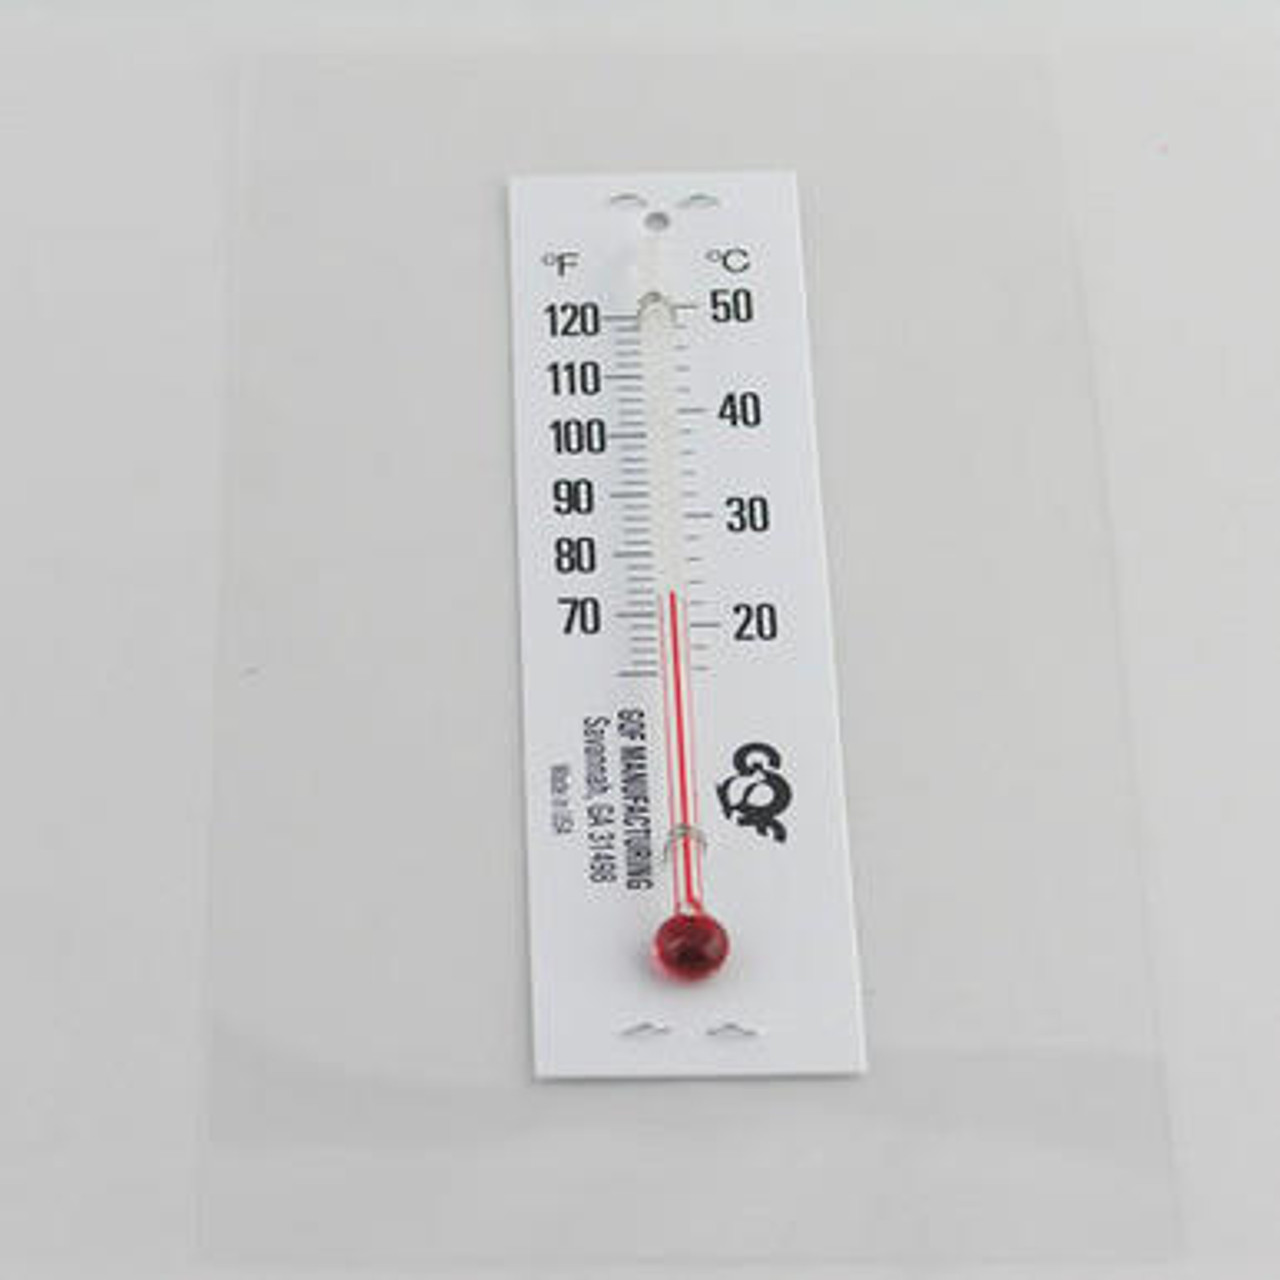 https://cdn11.bigcommerce.com/s-dhdy1goaa7/images/stencil/1280x1280/products/4450/6290/INCUBATOR-THERMOMETER-LG__21065.1638914357.386.513__22150.1675884457.jpg?c=1